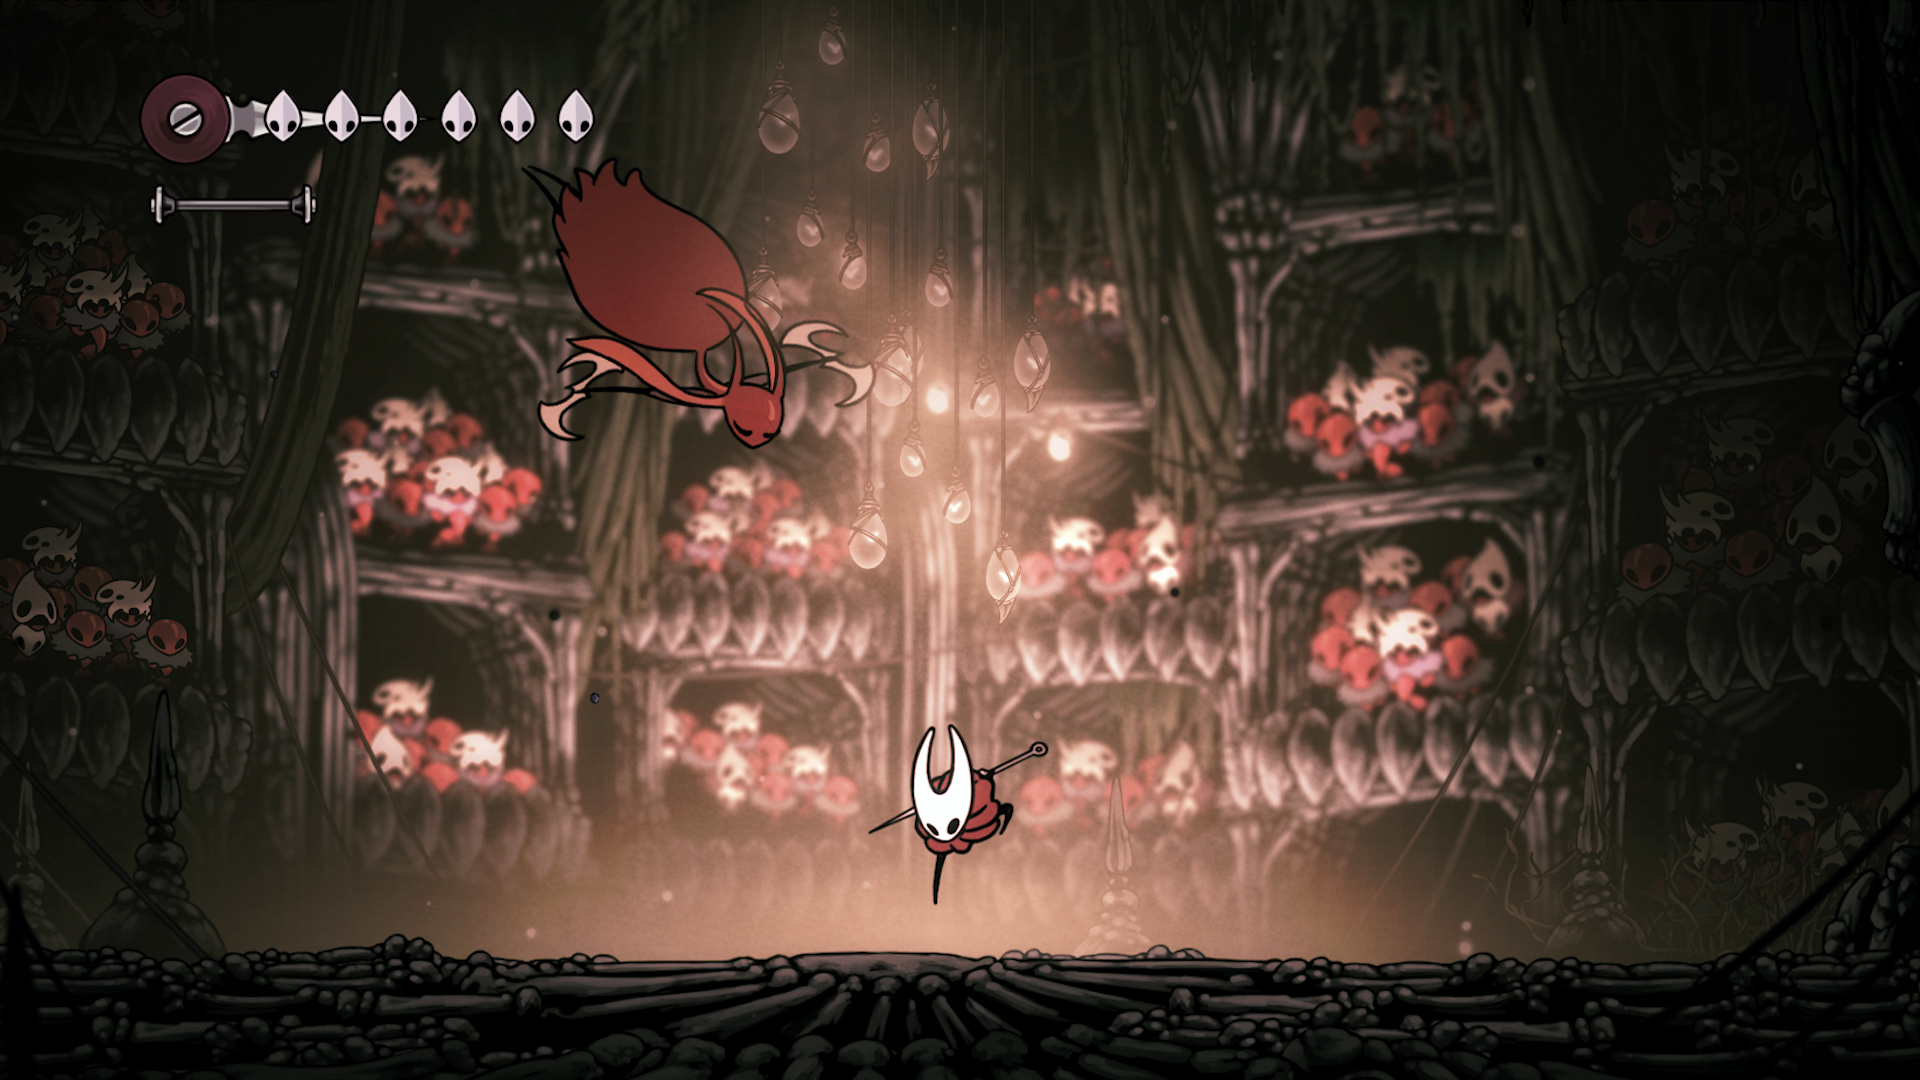 download hollow knight silksong release